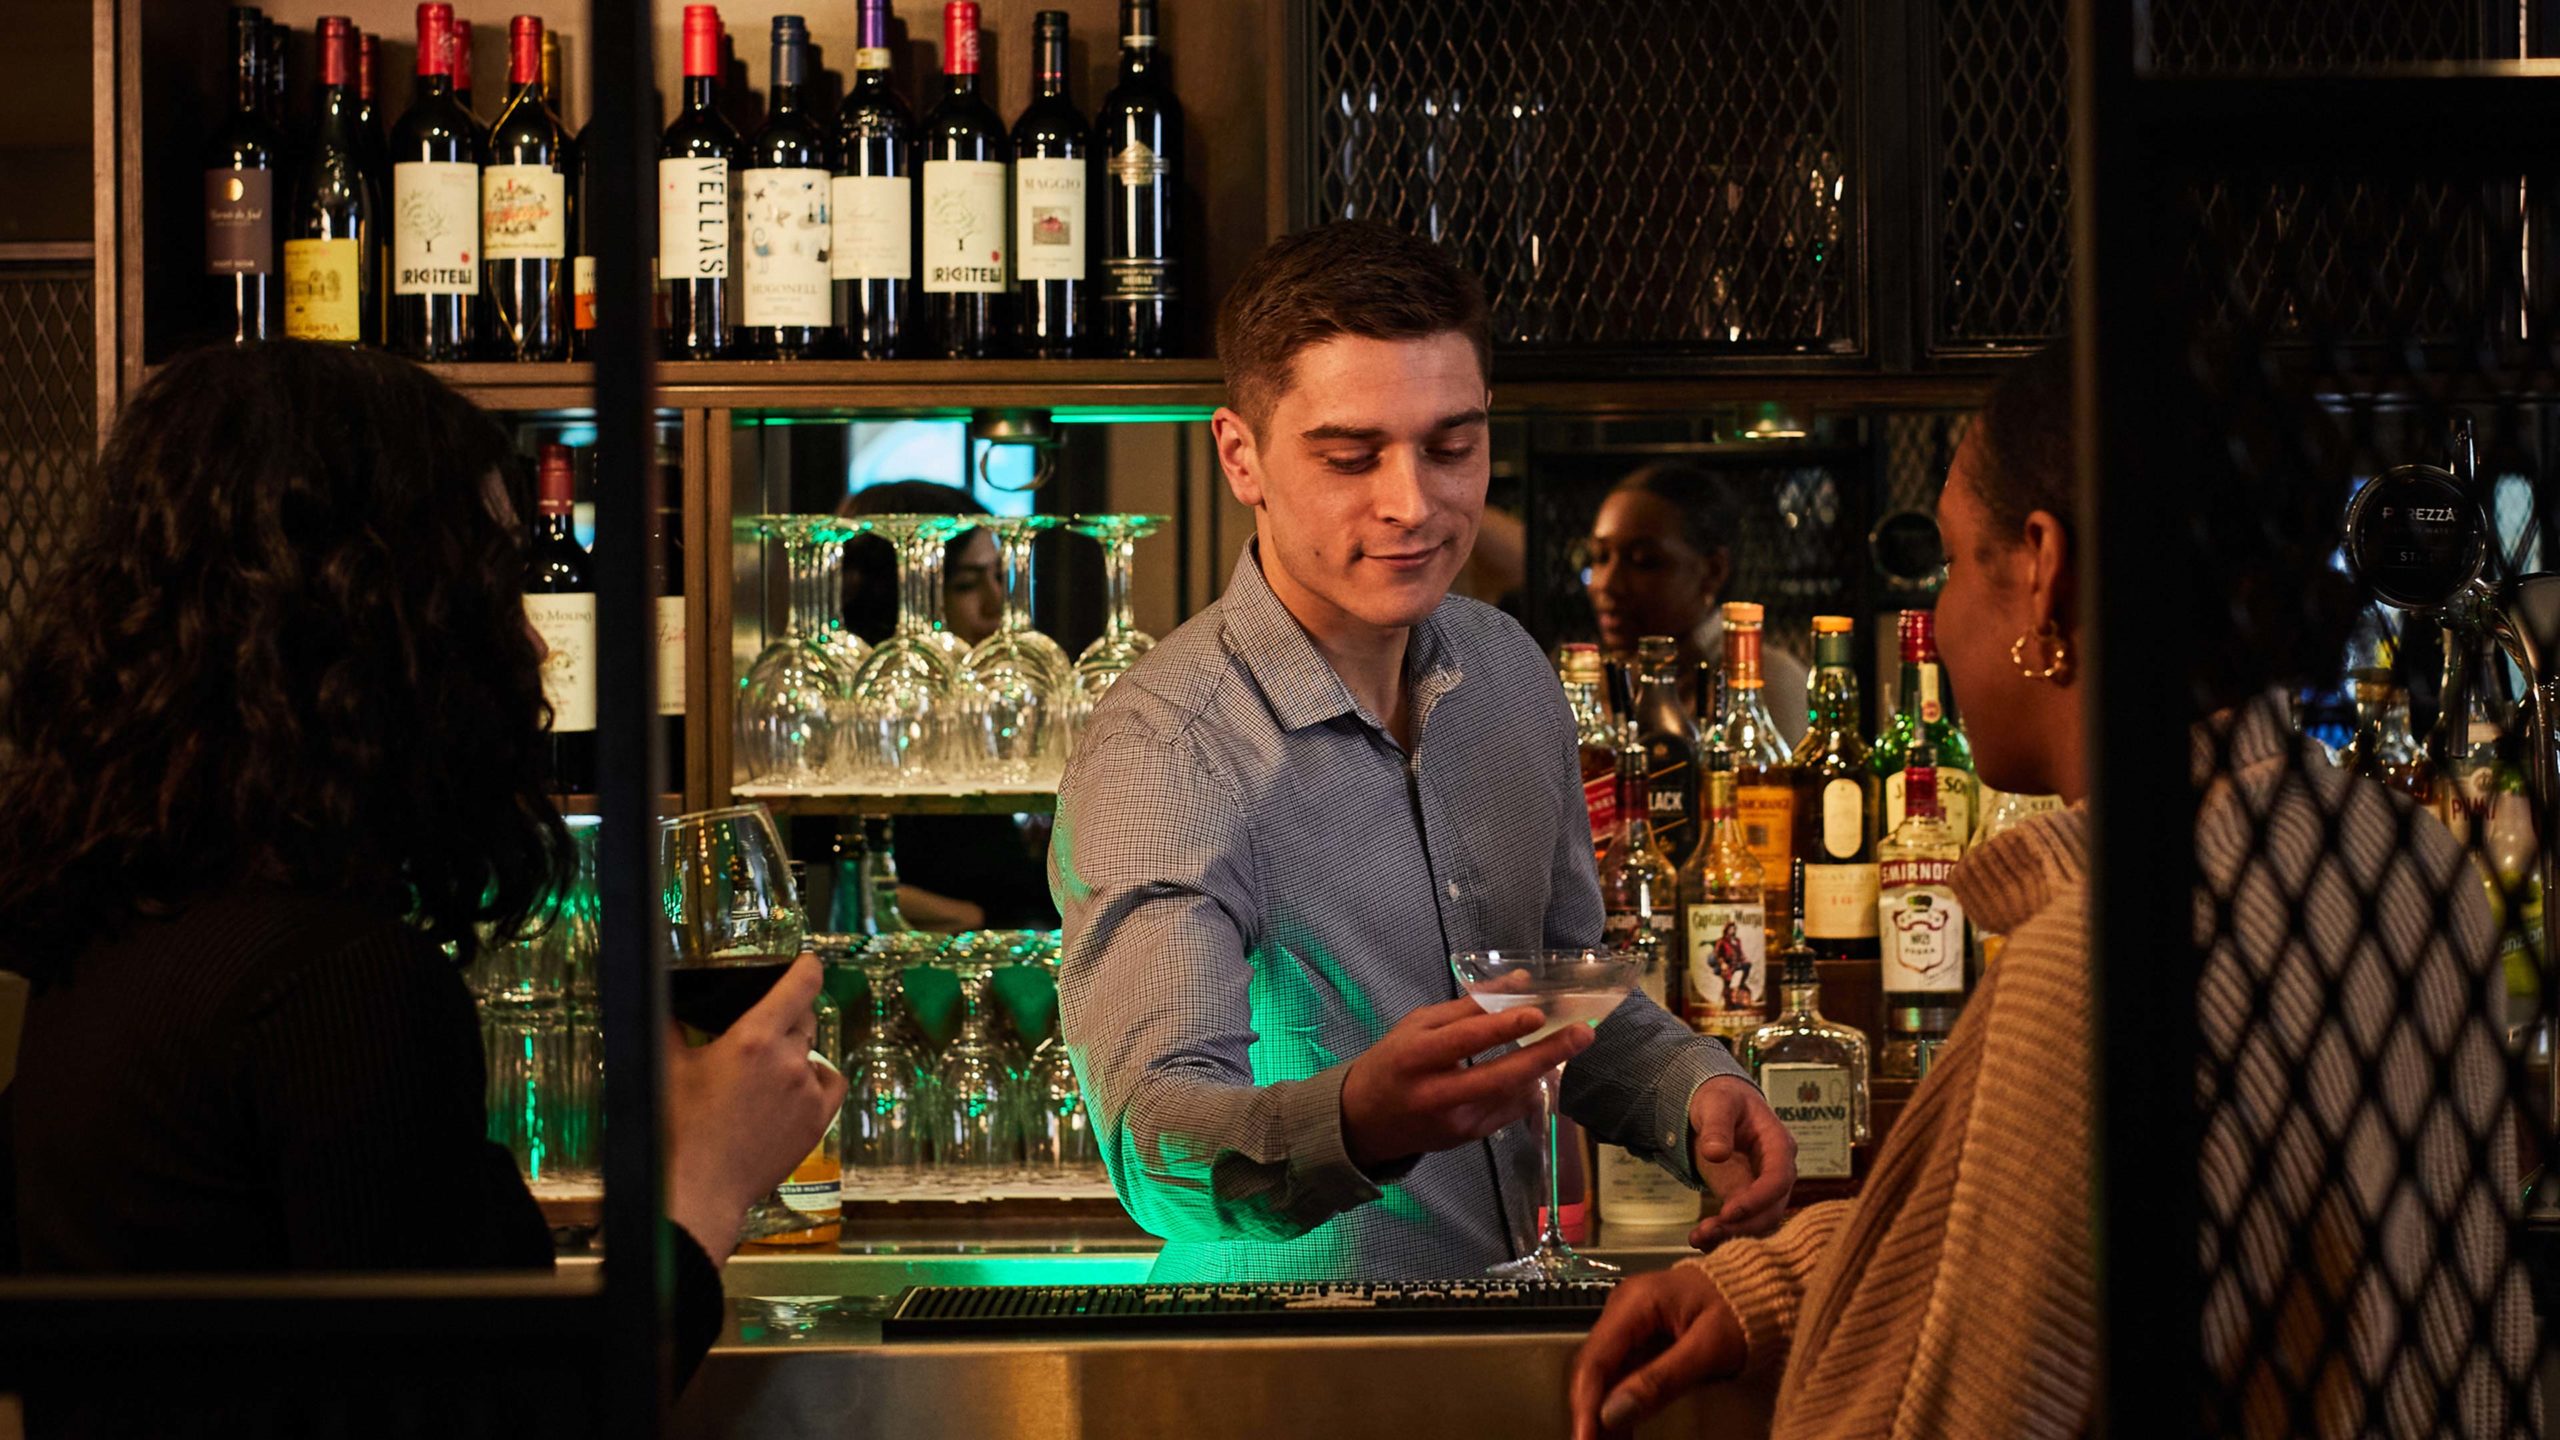 Bartender is serving drink to a woman.